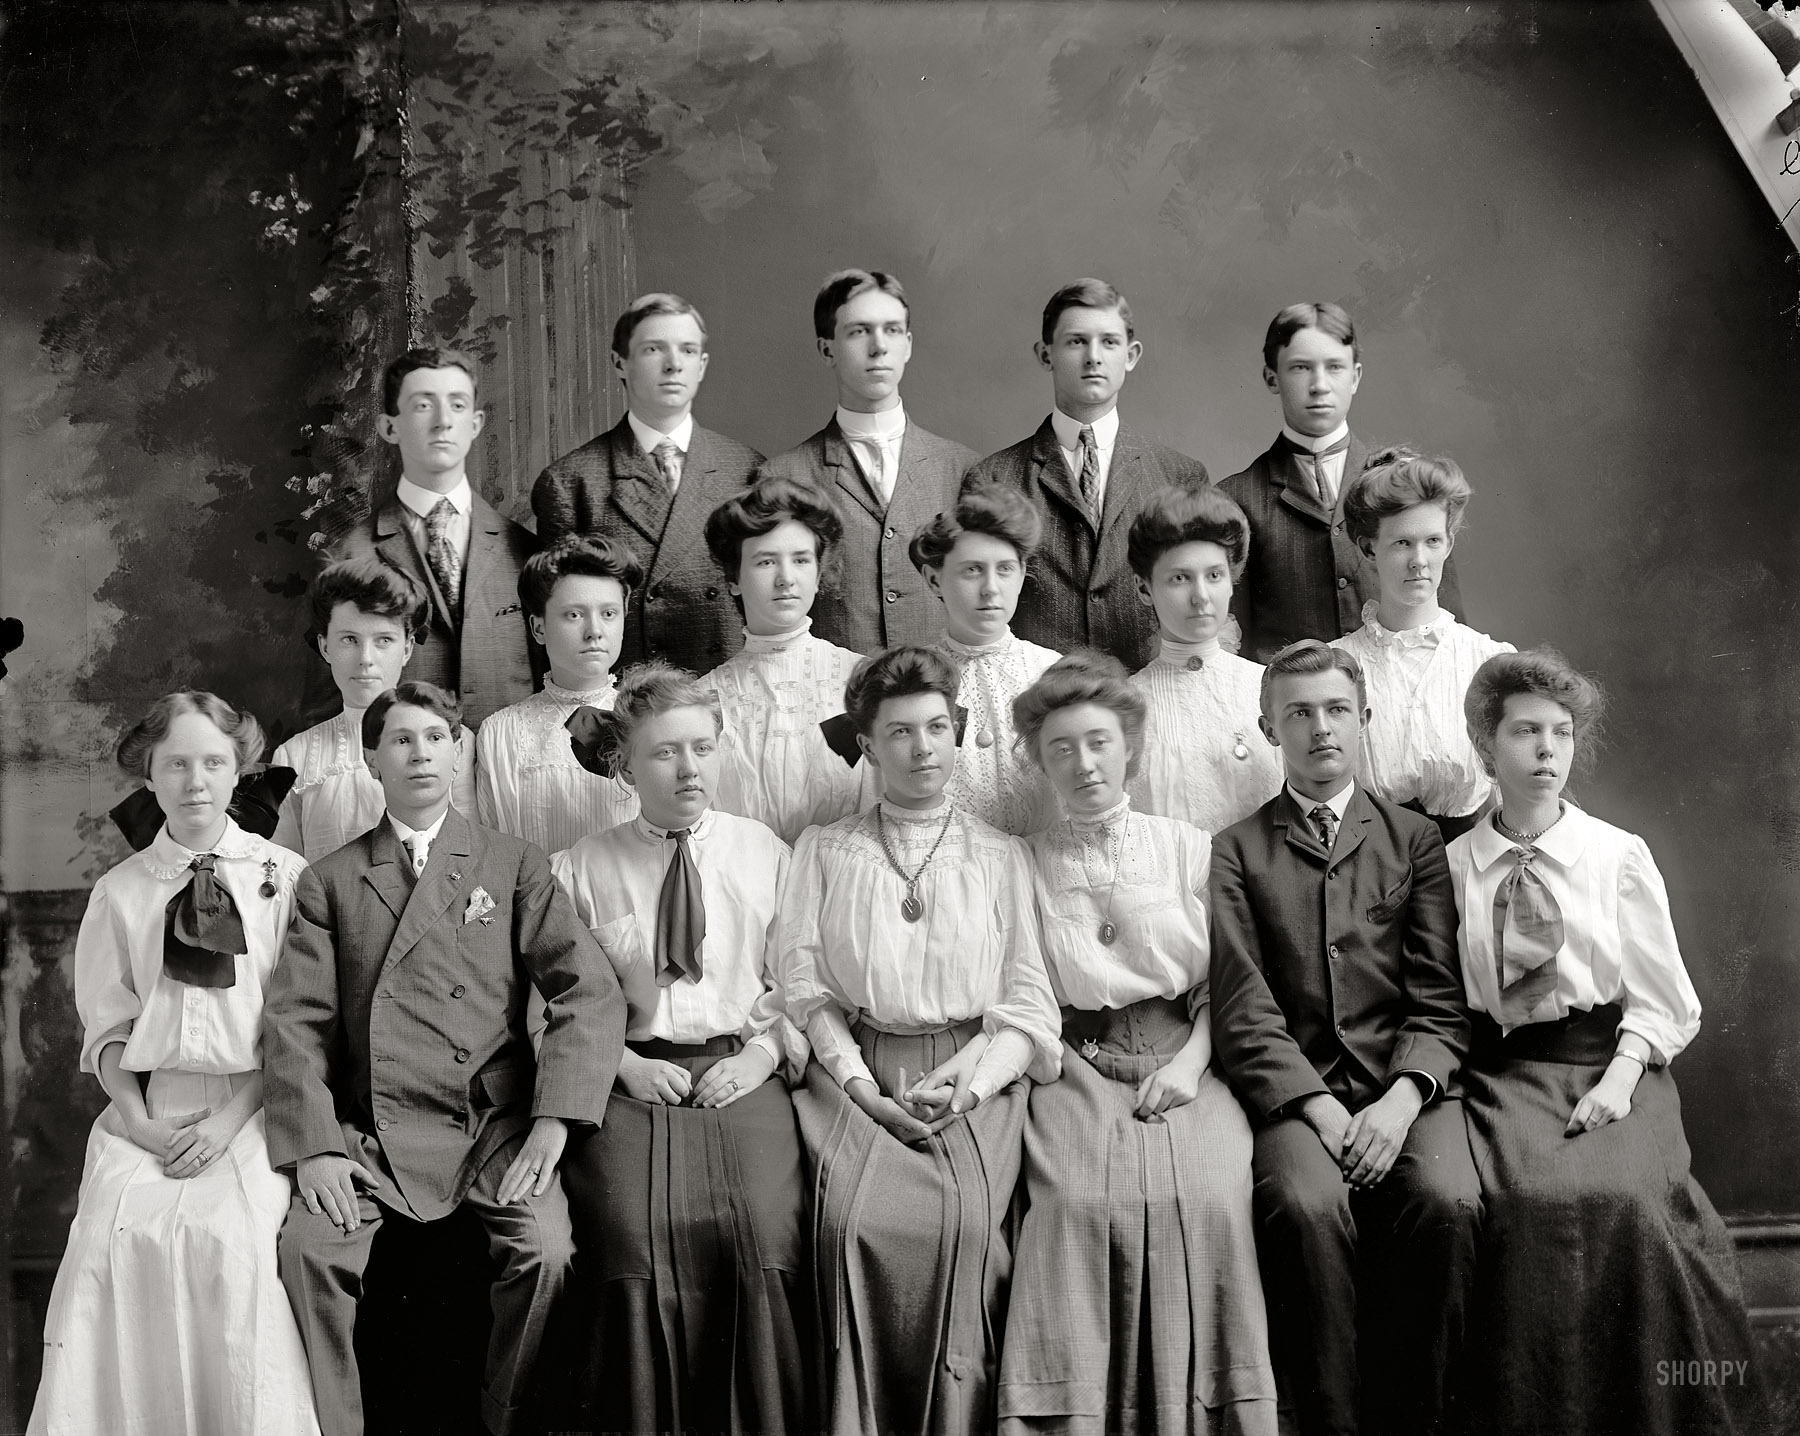 Washington, D.C., ca. 1905. "Business High." Another batch of young folks sit for their portrait at the H&E studio. Harris & Ewing glass negative. View full size.